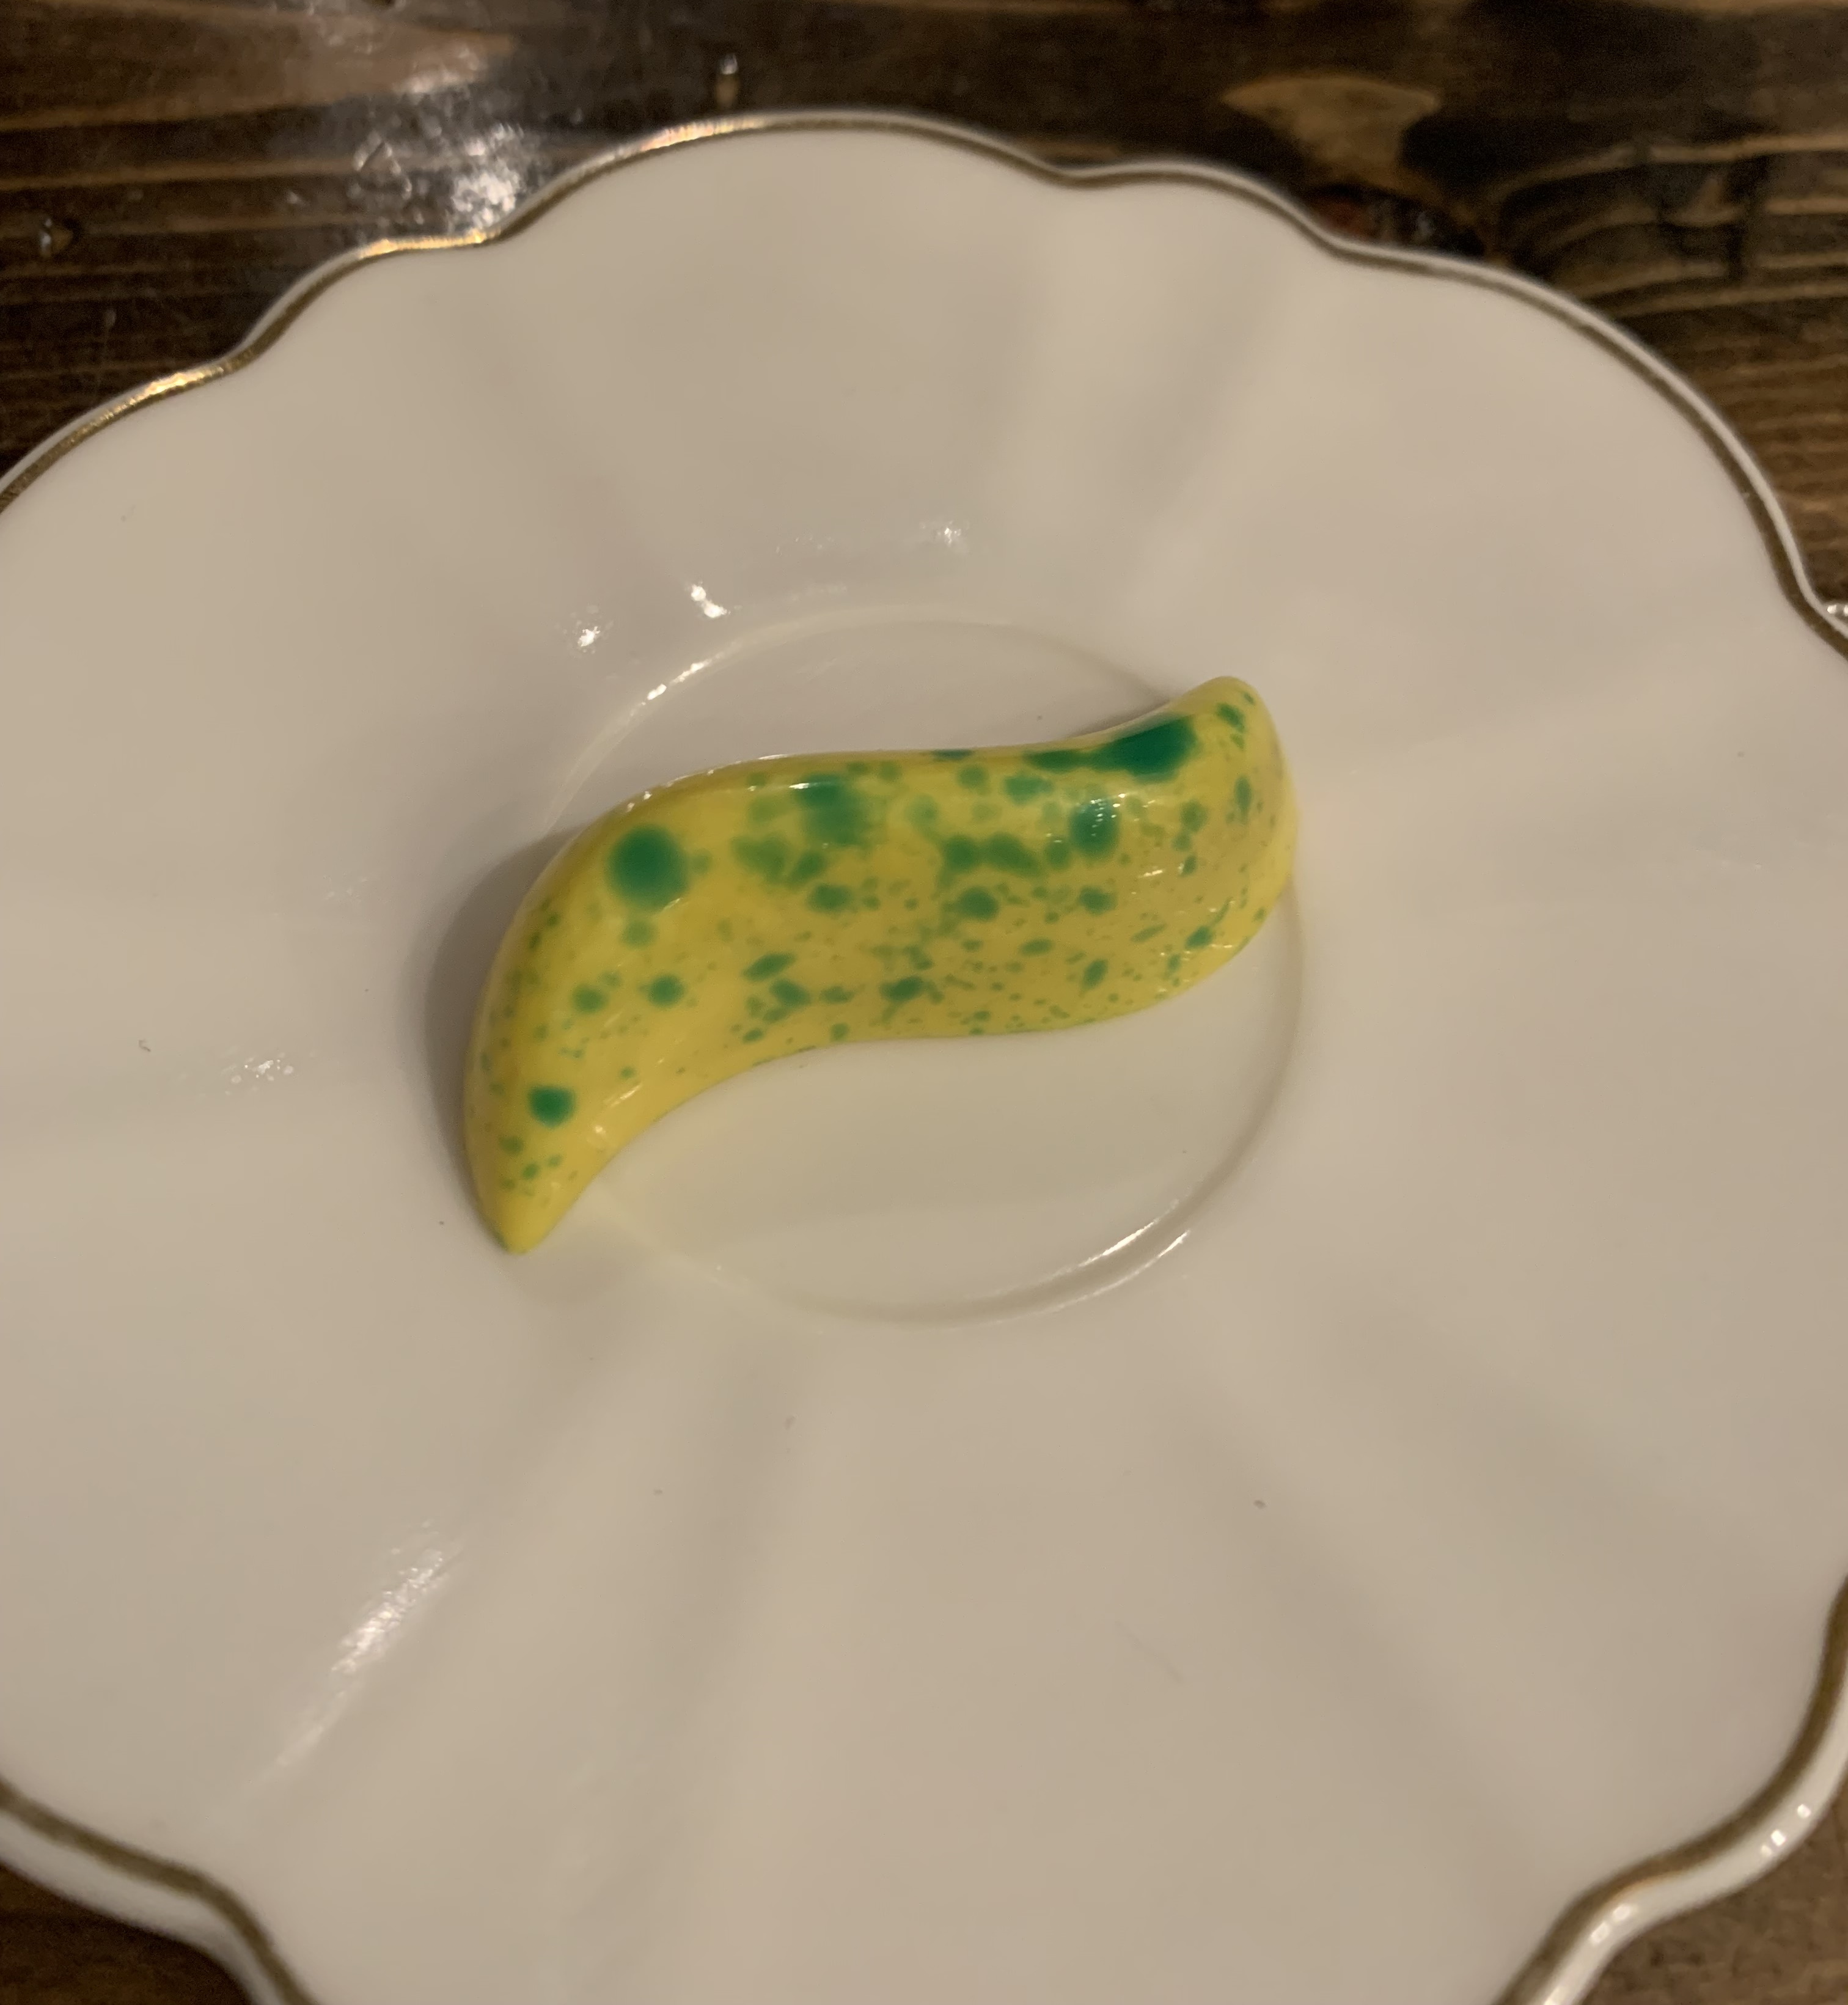 A single bonbon shaped like a slash, with the ends curved. It's shiny and yellow, with green speckles.